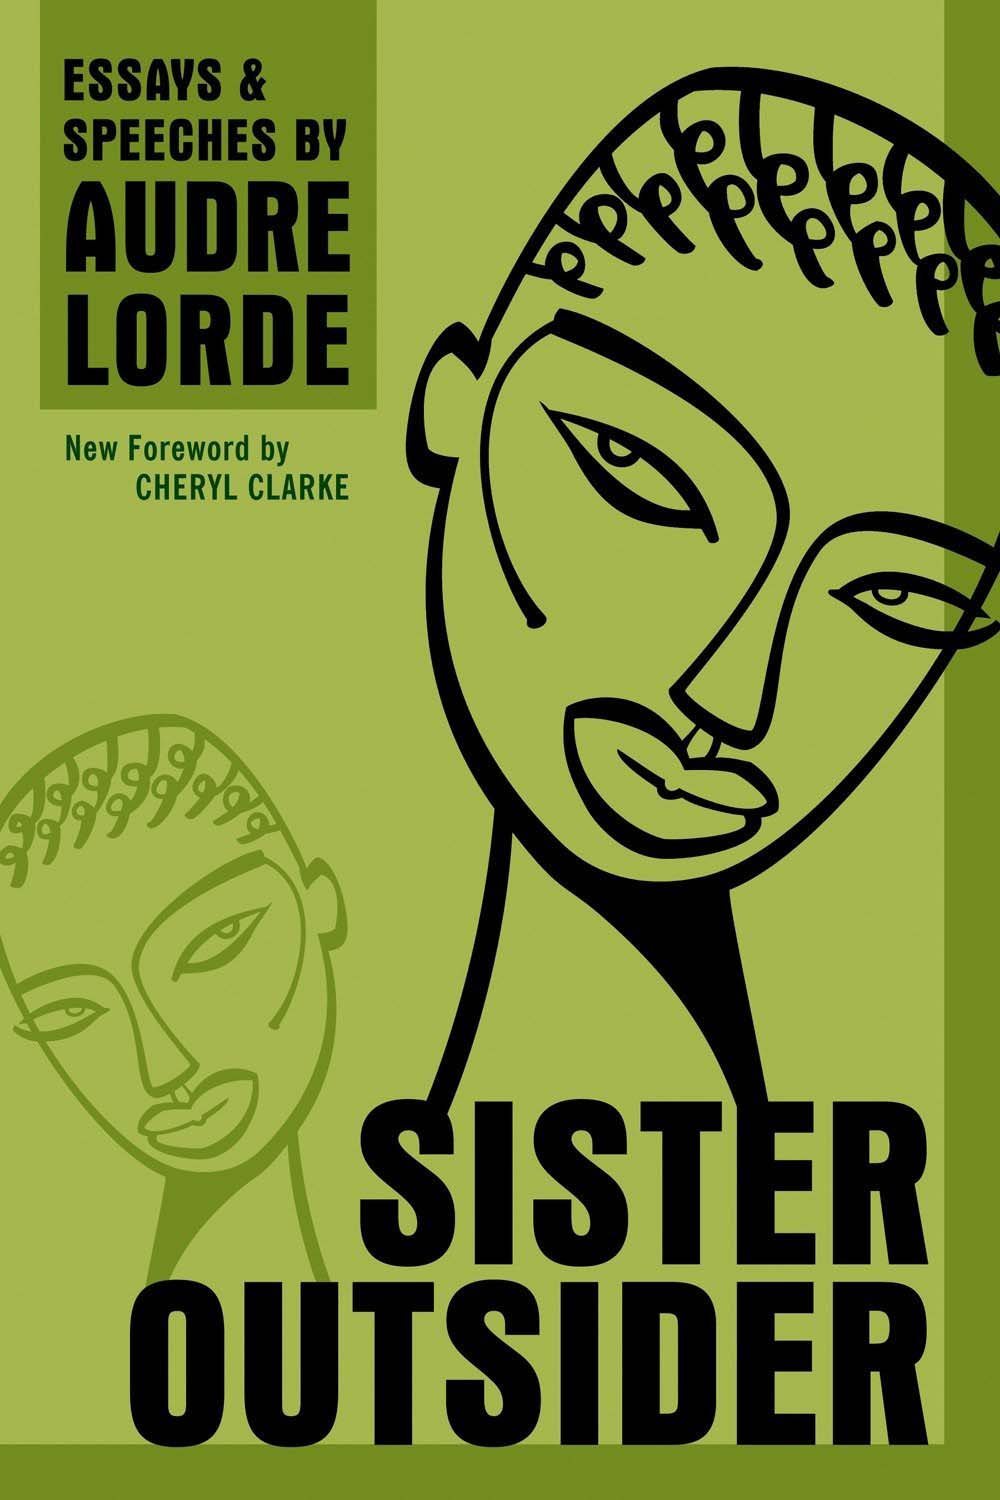 Audre Lorde, “Sister Outsider” (1984). 